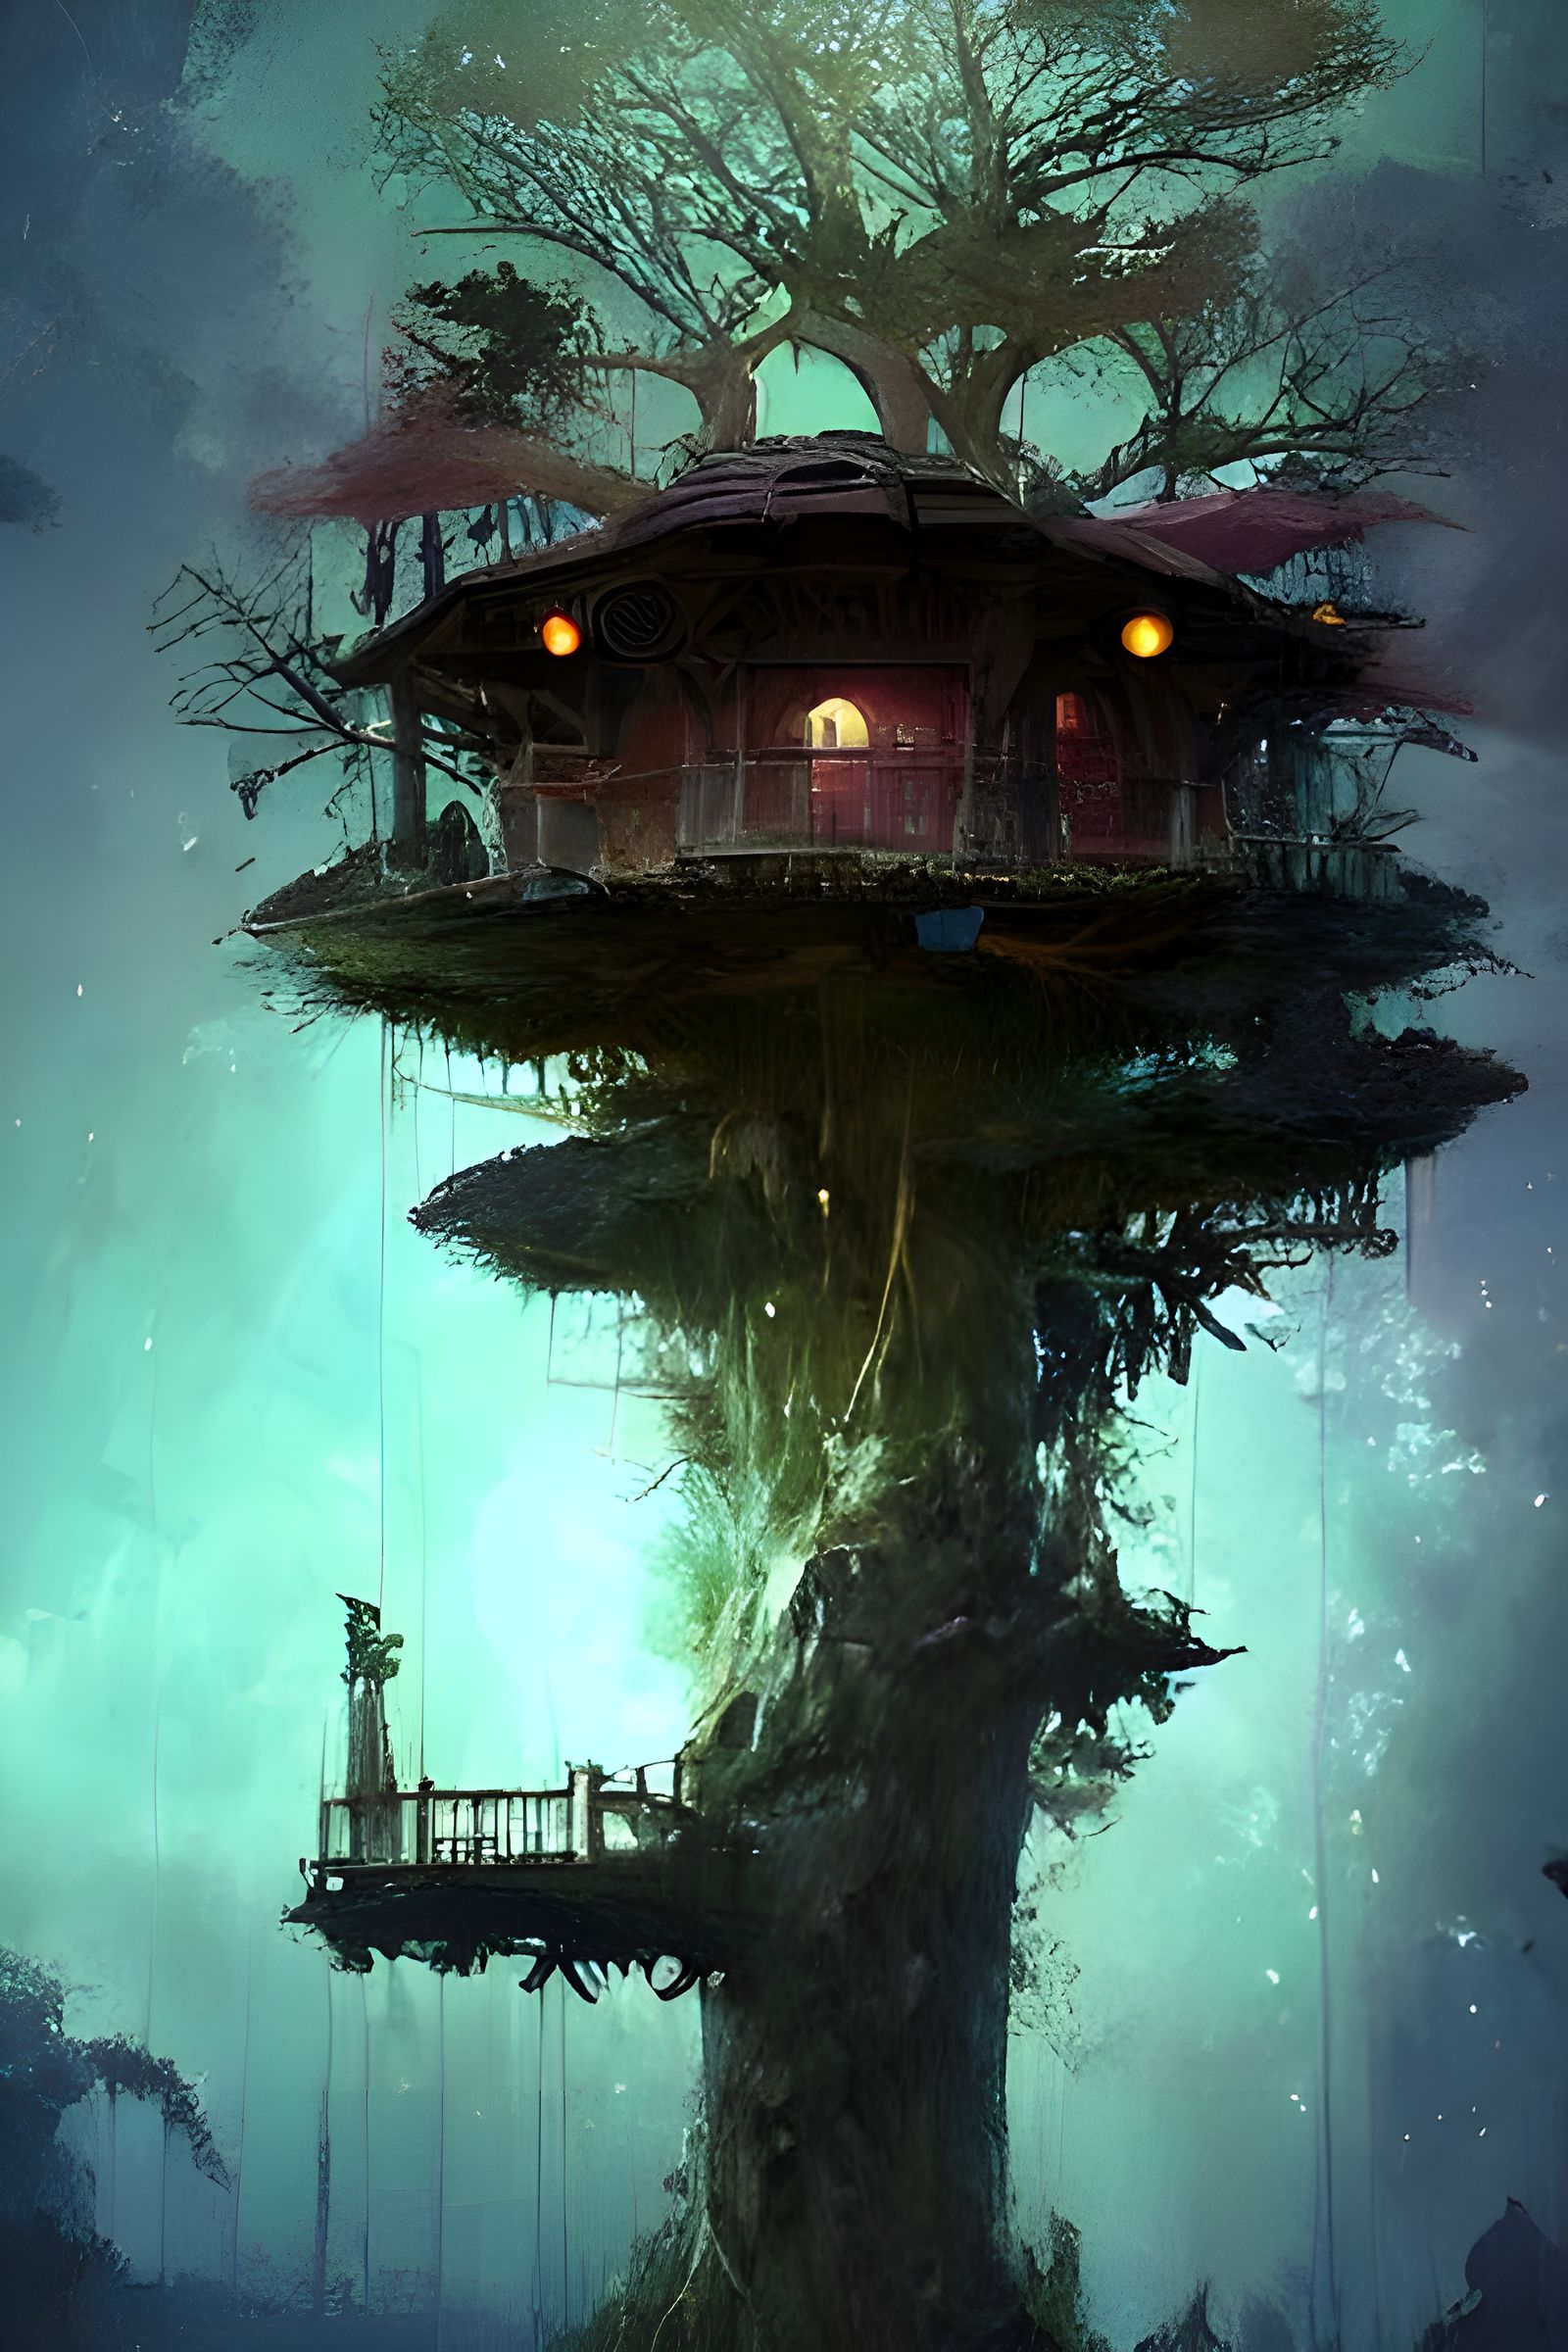 Treehouse on top of a giant tree